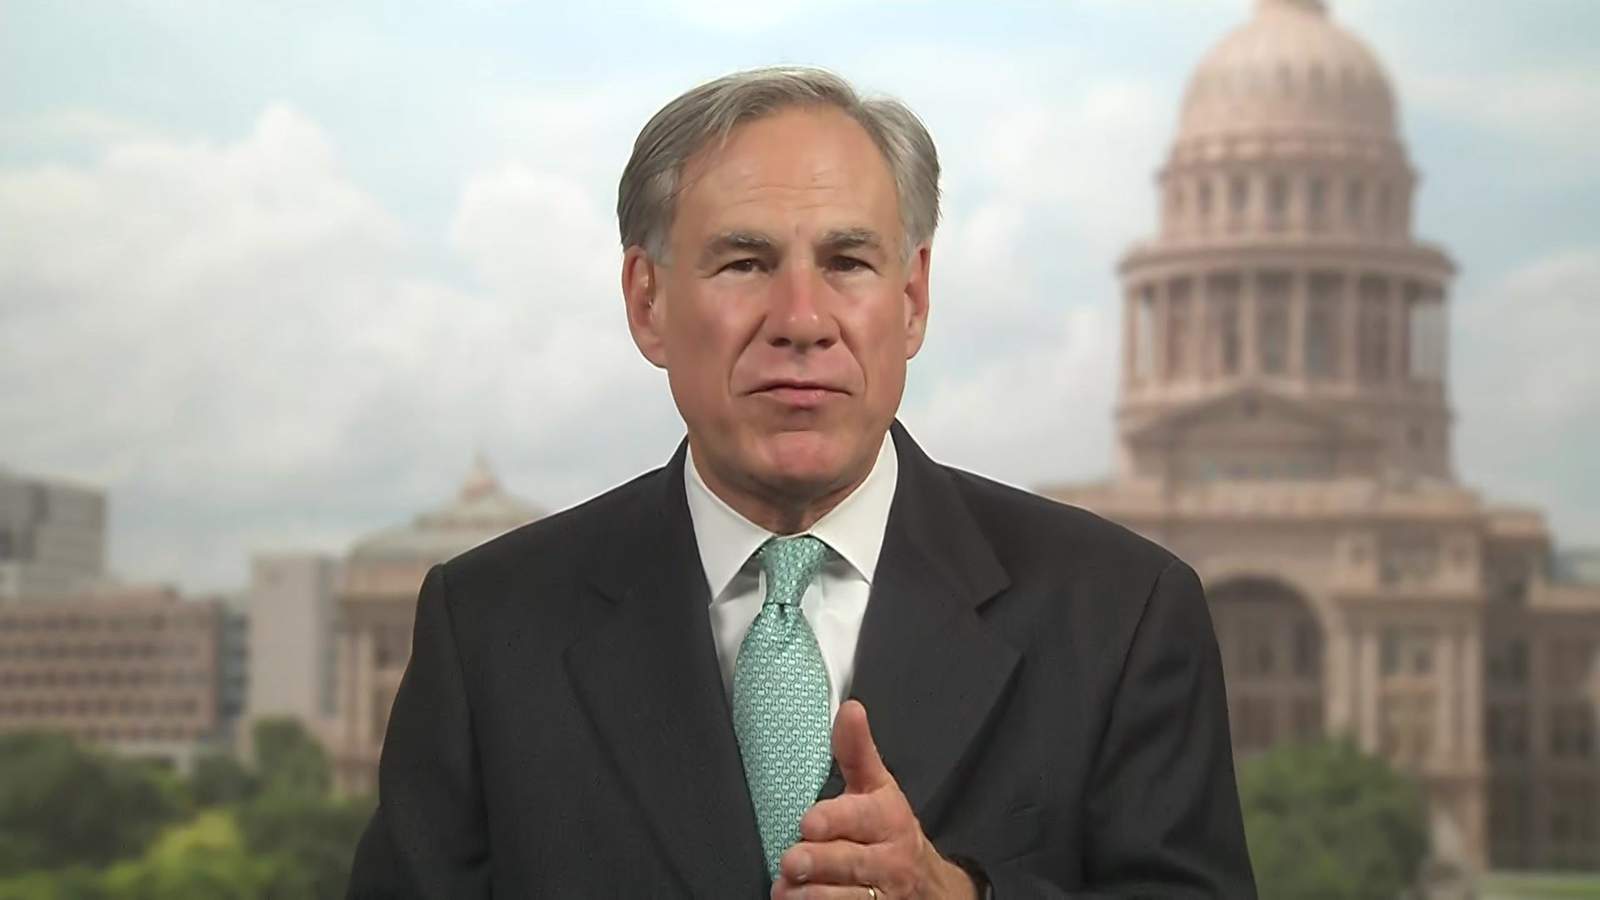 INTERVIEW: If all Texans wear masks there will be no need for lockdown, Gov. Abbott says